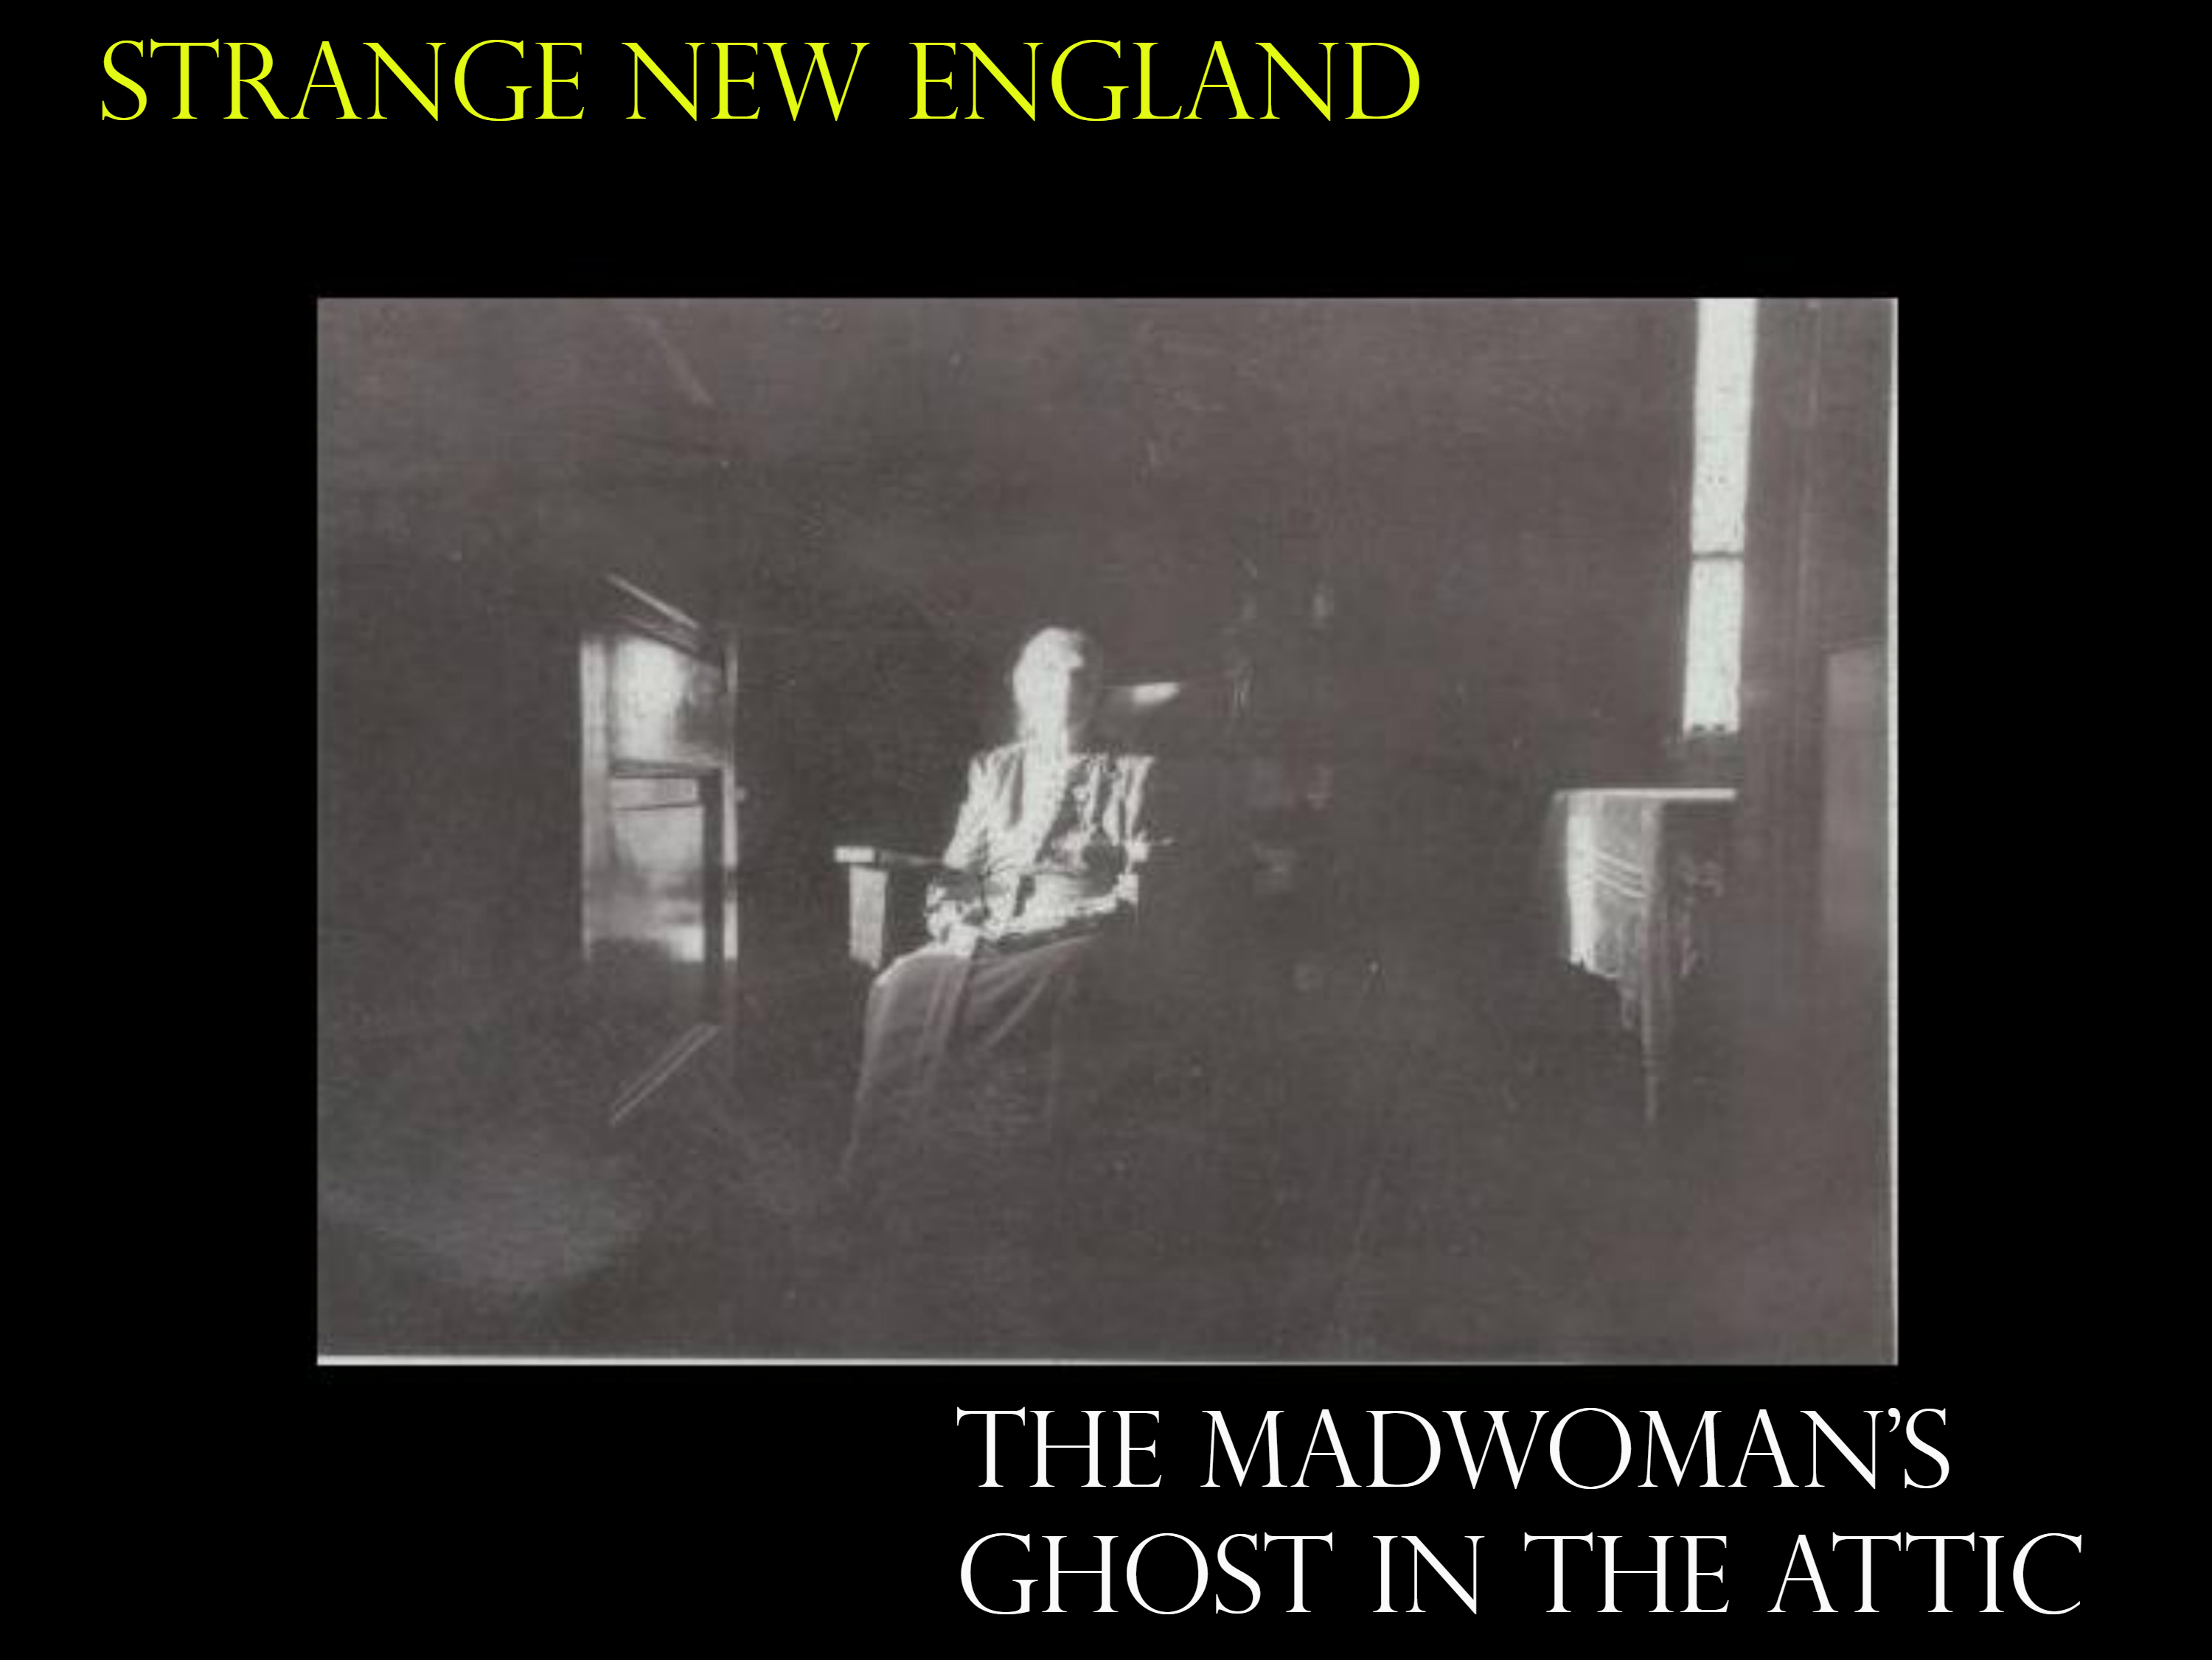 The Madwoman’s Ghost in the Attic